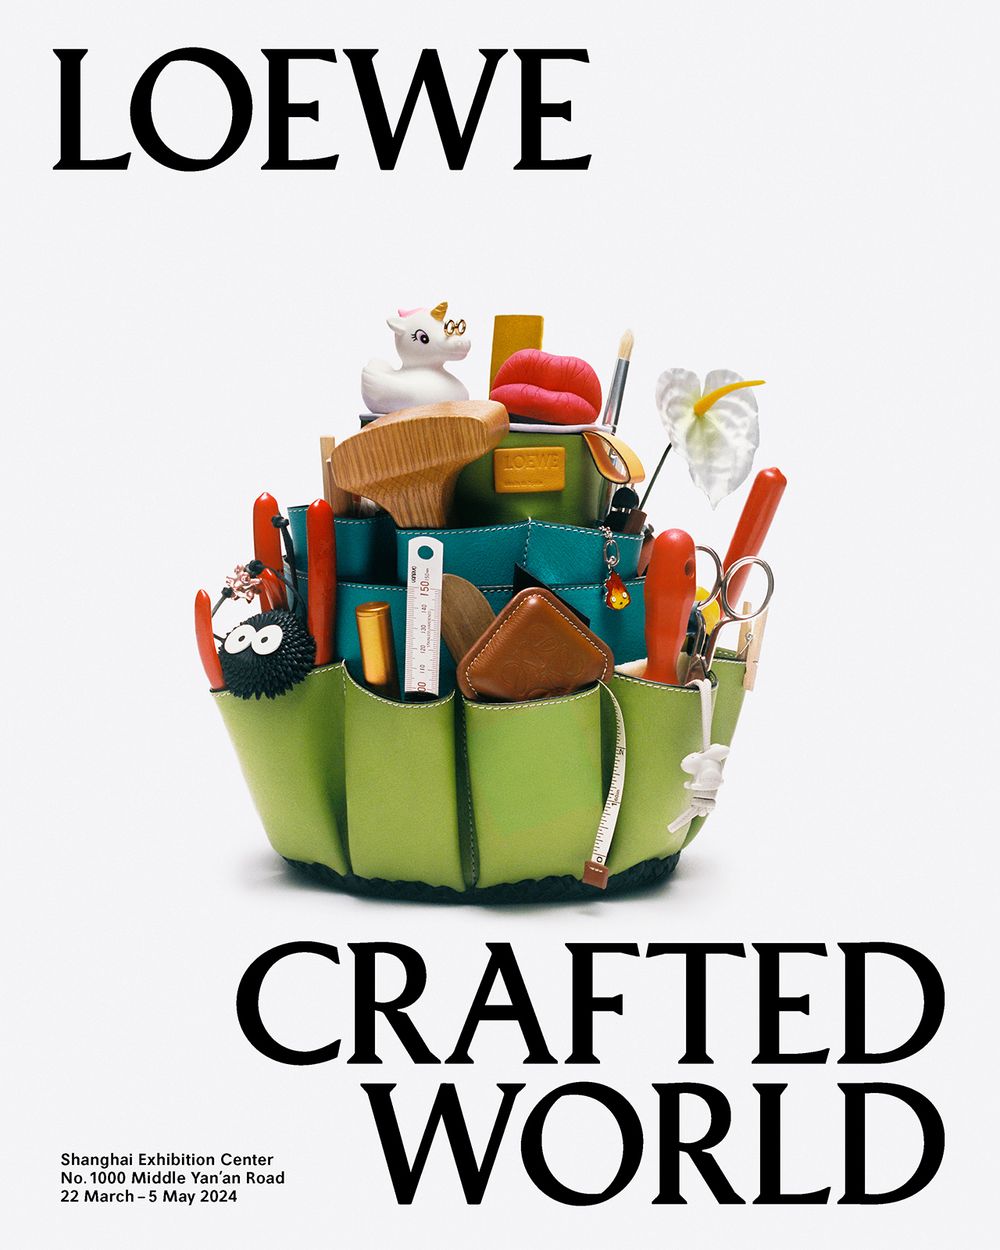 Loewe Crafted World Exhibition Poster